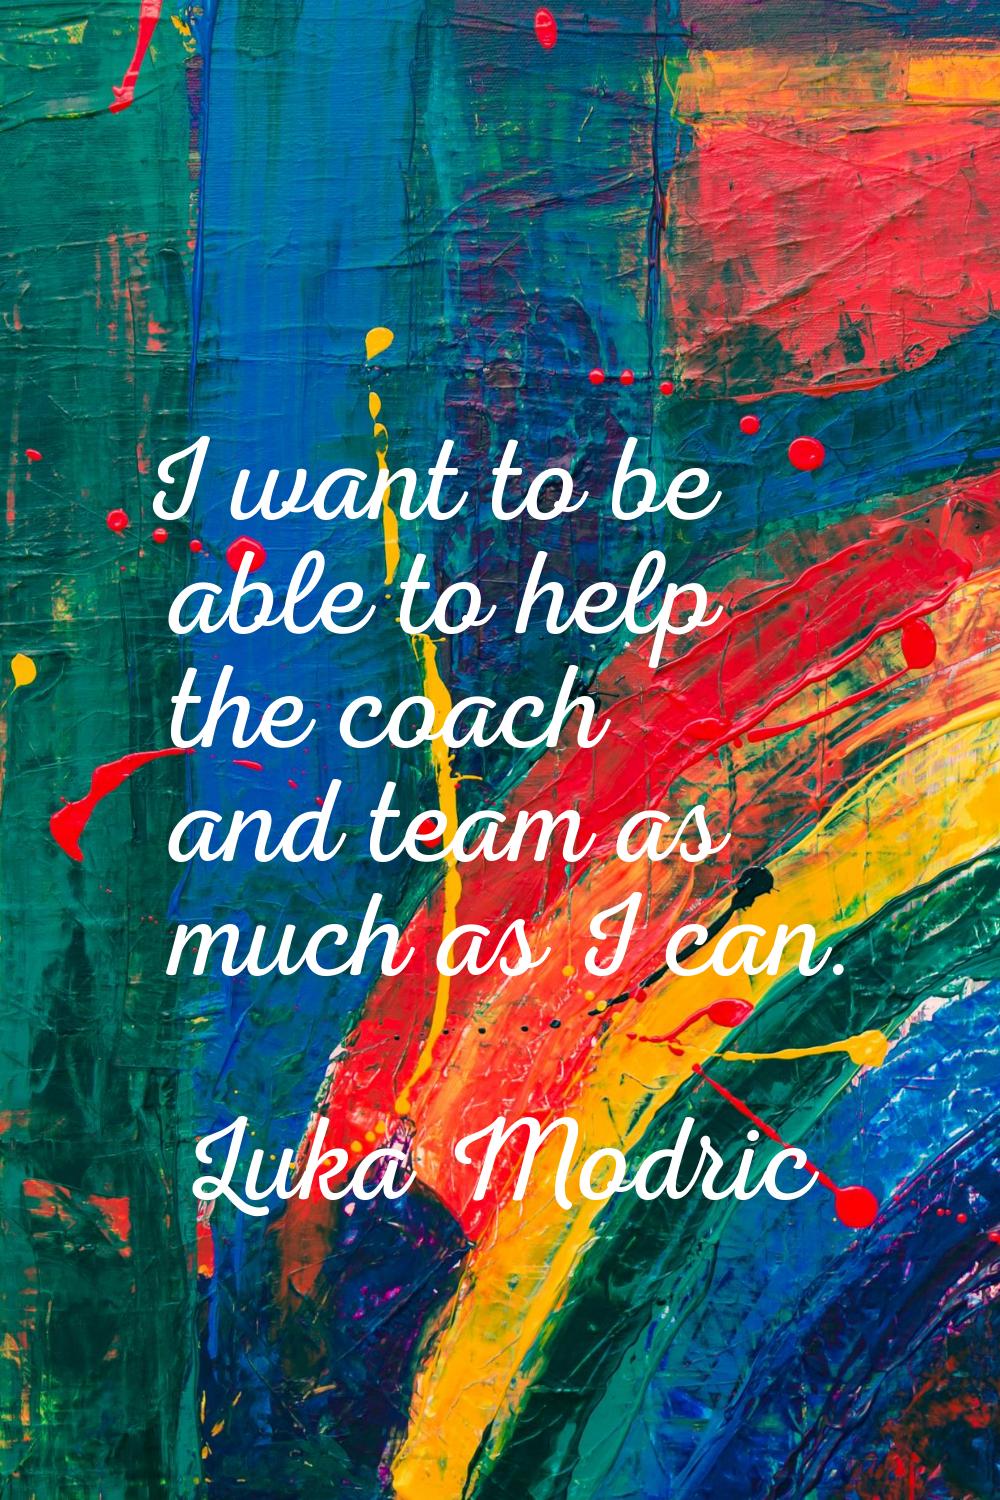 I want to be able to help the coach and team as much as I can.